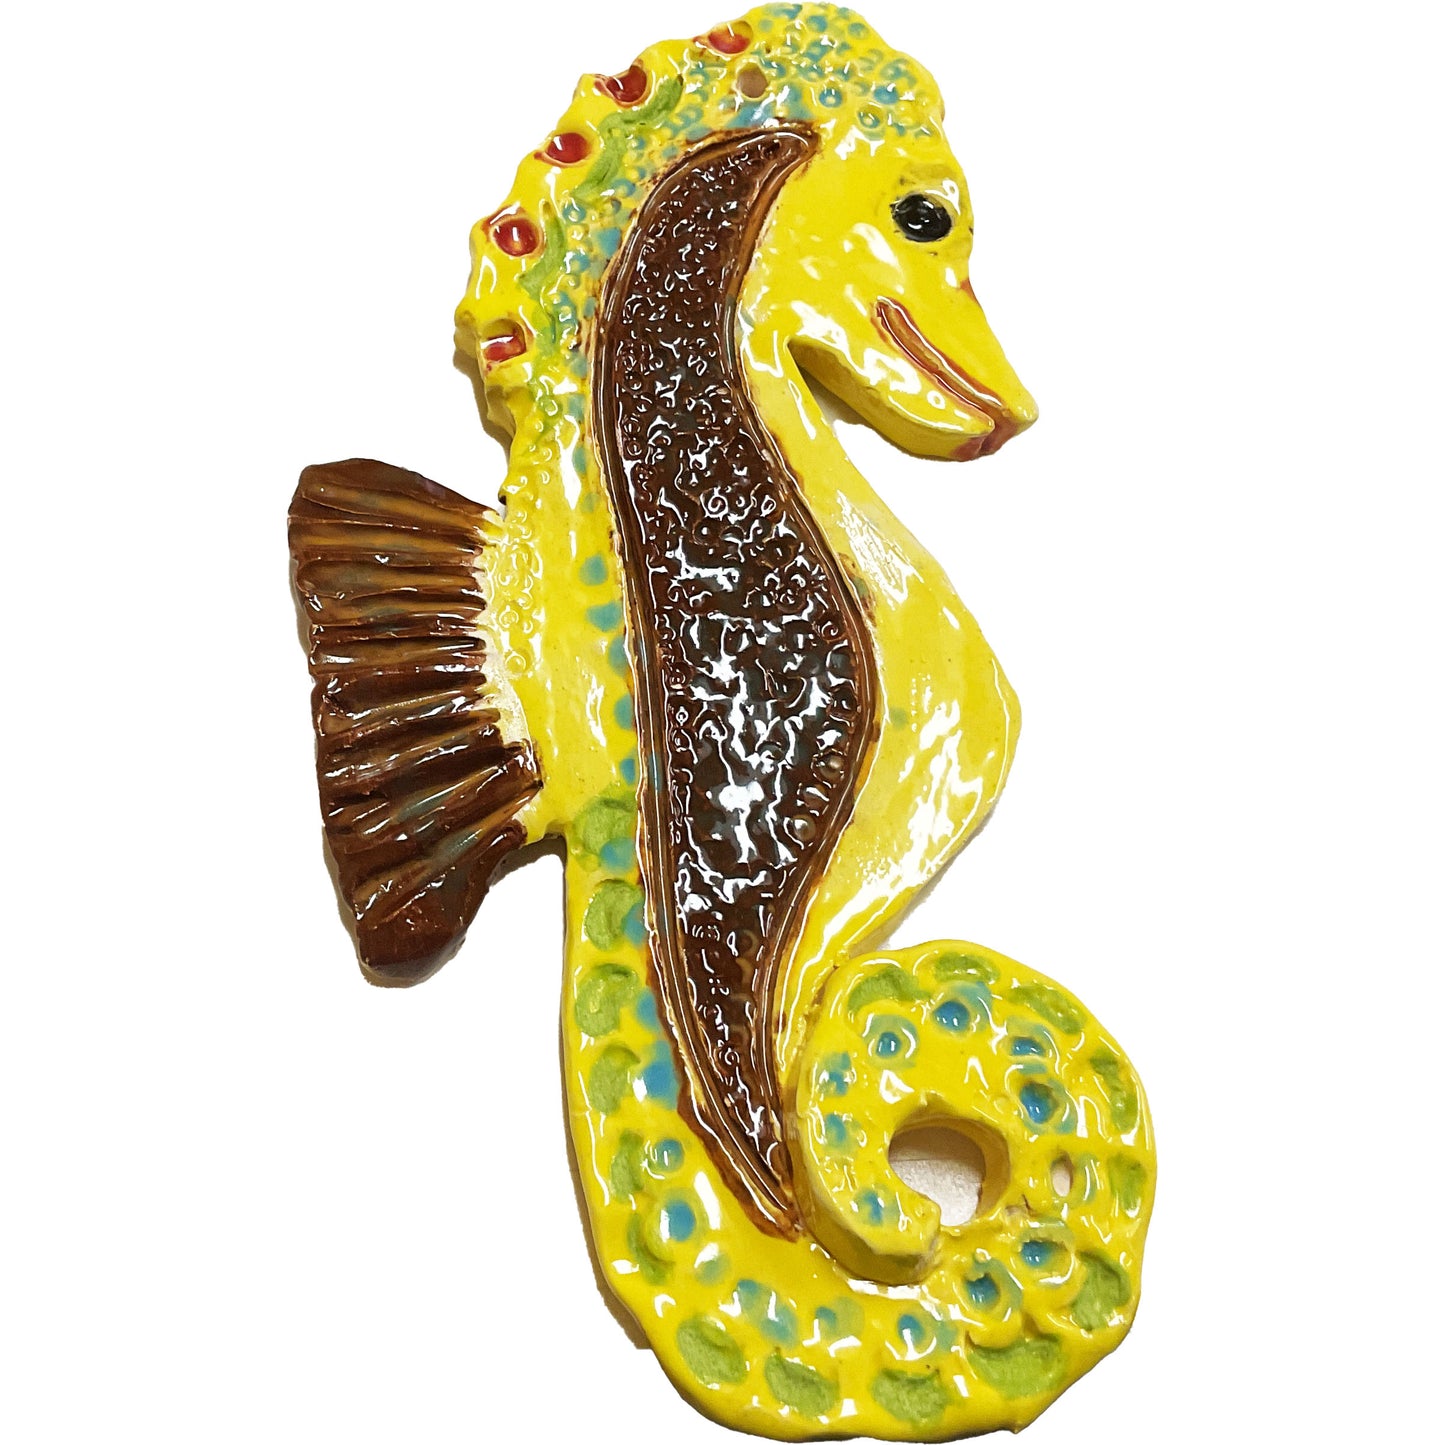 Ceramic Arts Handmade Clay Crafts 7.5-inch x 4-inch Glazed Seahorse by Perry Miller